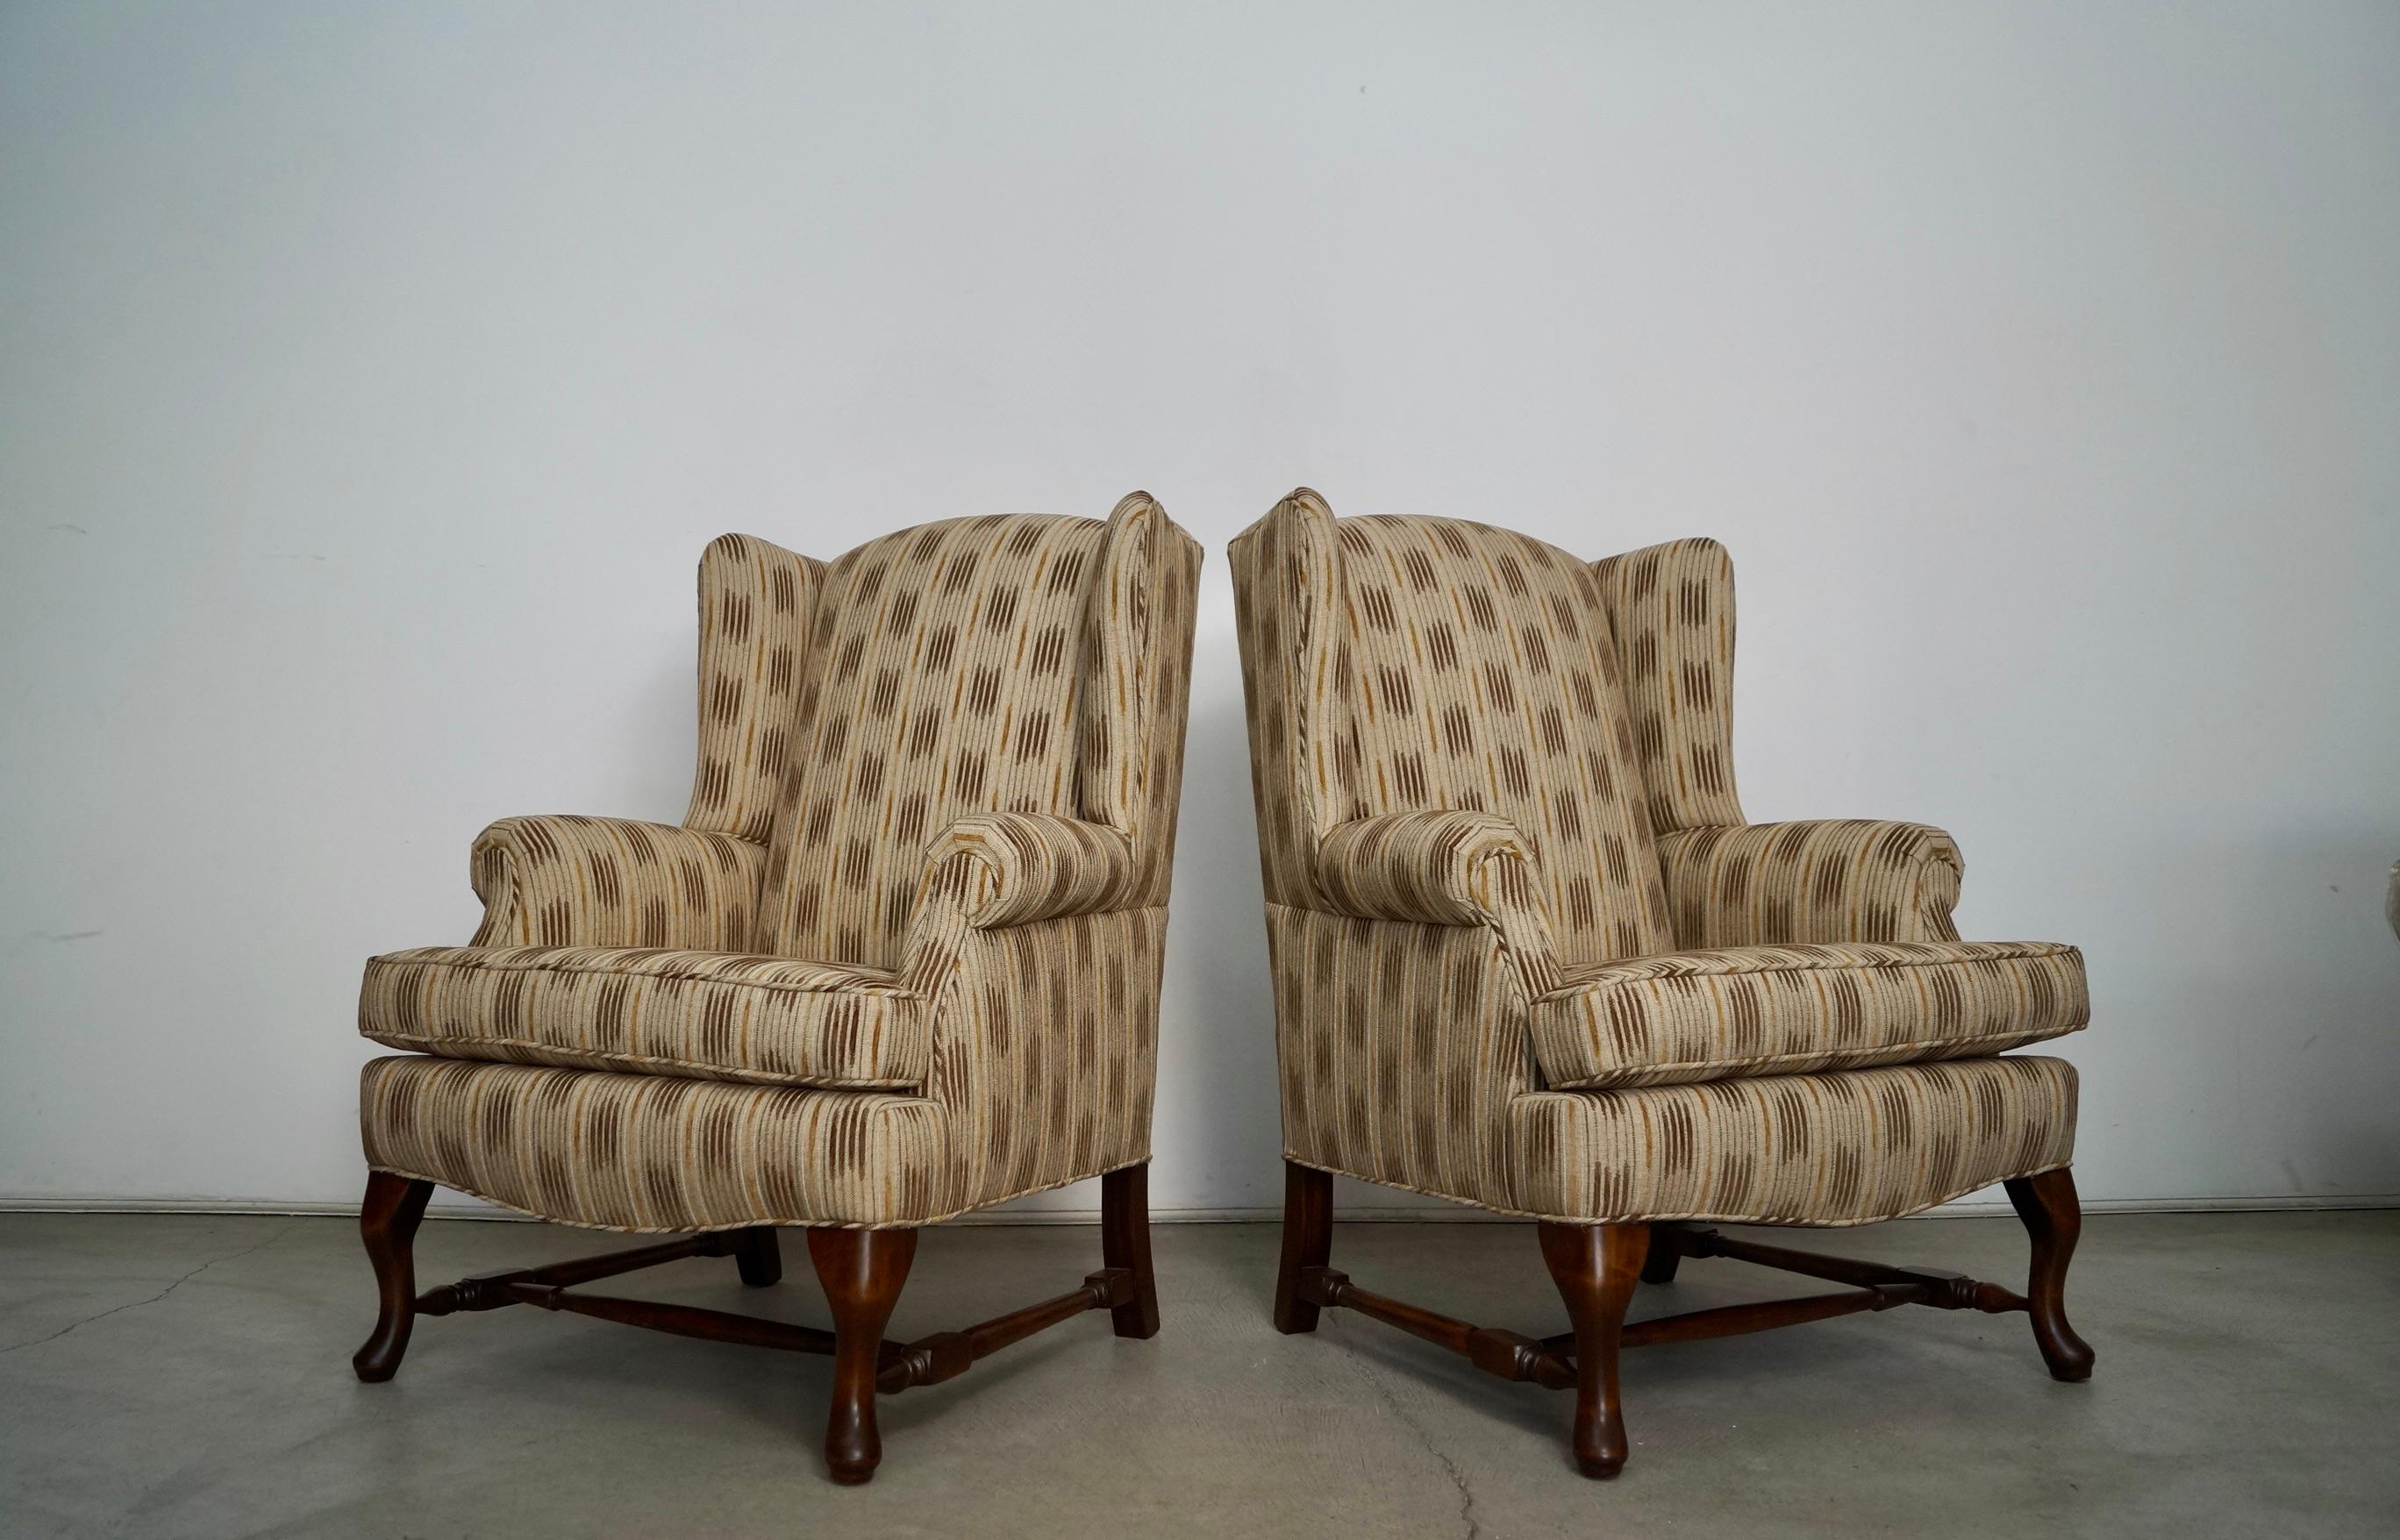 Hollywood Regency 1970's Wingback Chairs Refinished & Reupholstered - a Pair For Sale